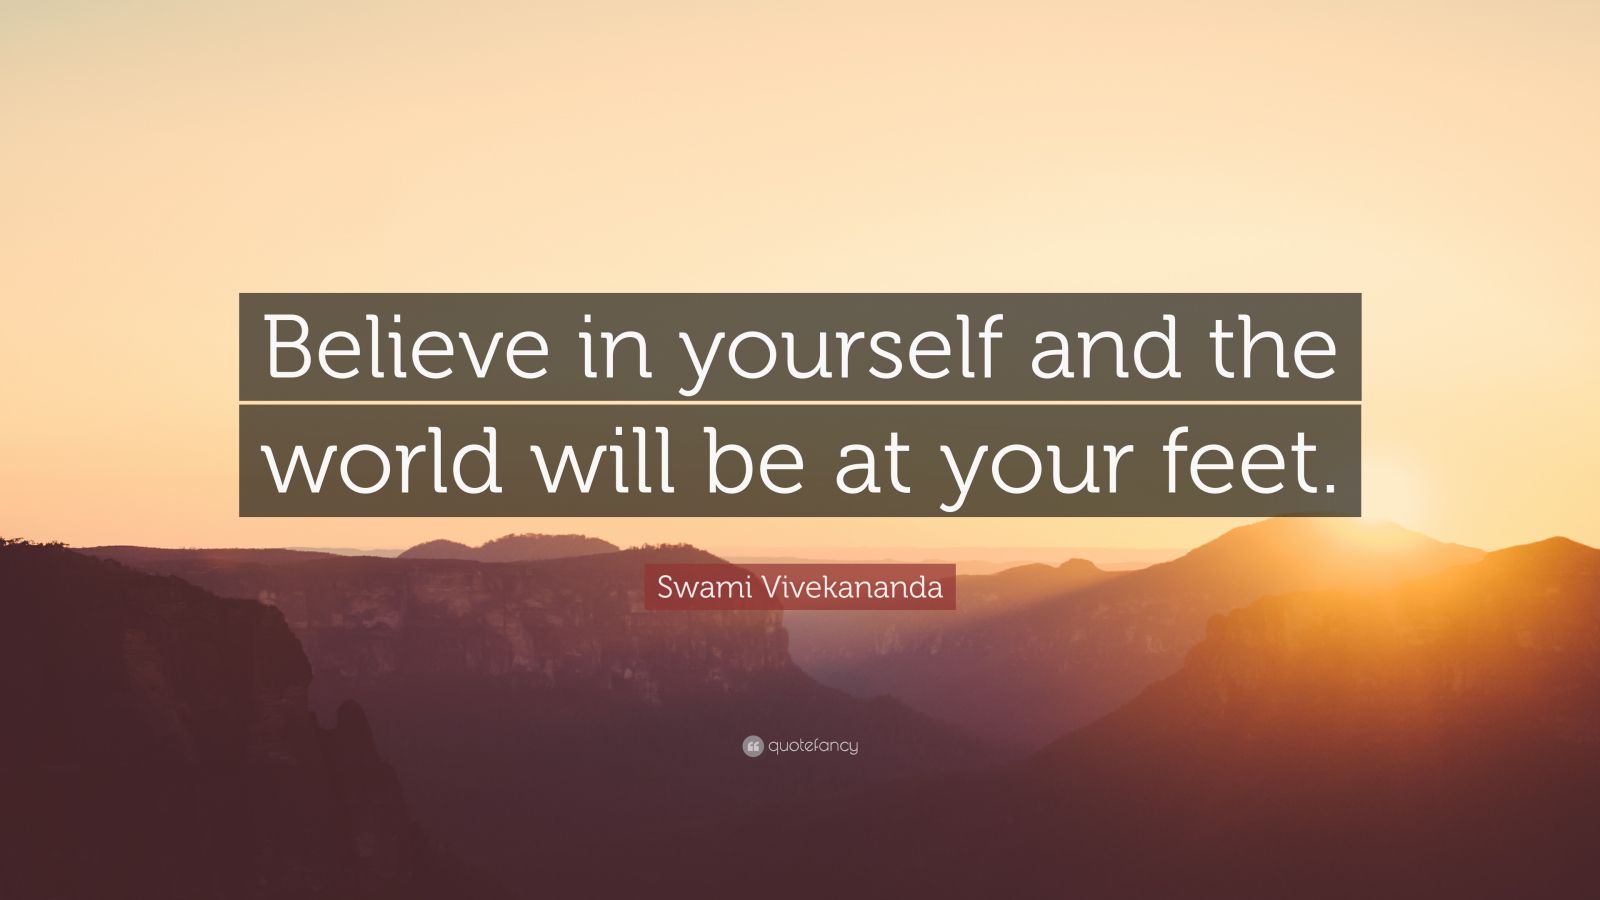 26590 Swami Vivekananda Quote Believe in yourself and the world will be